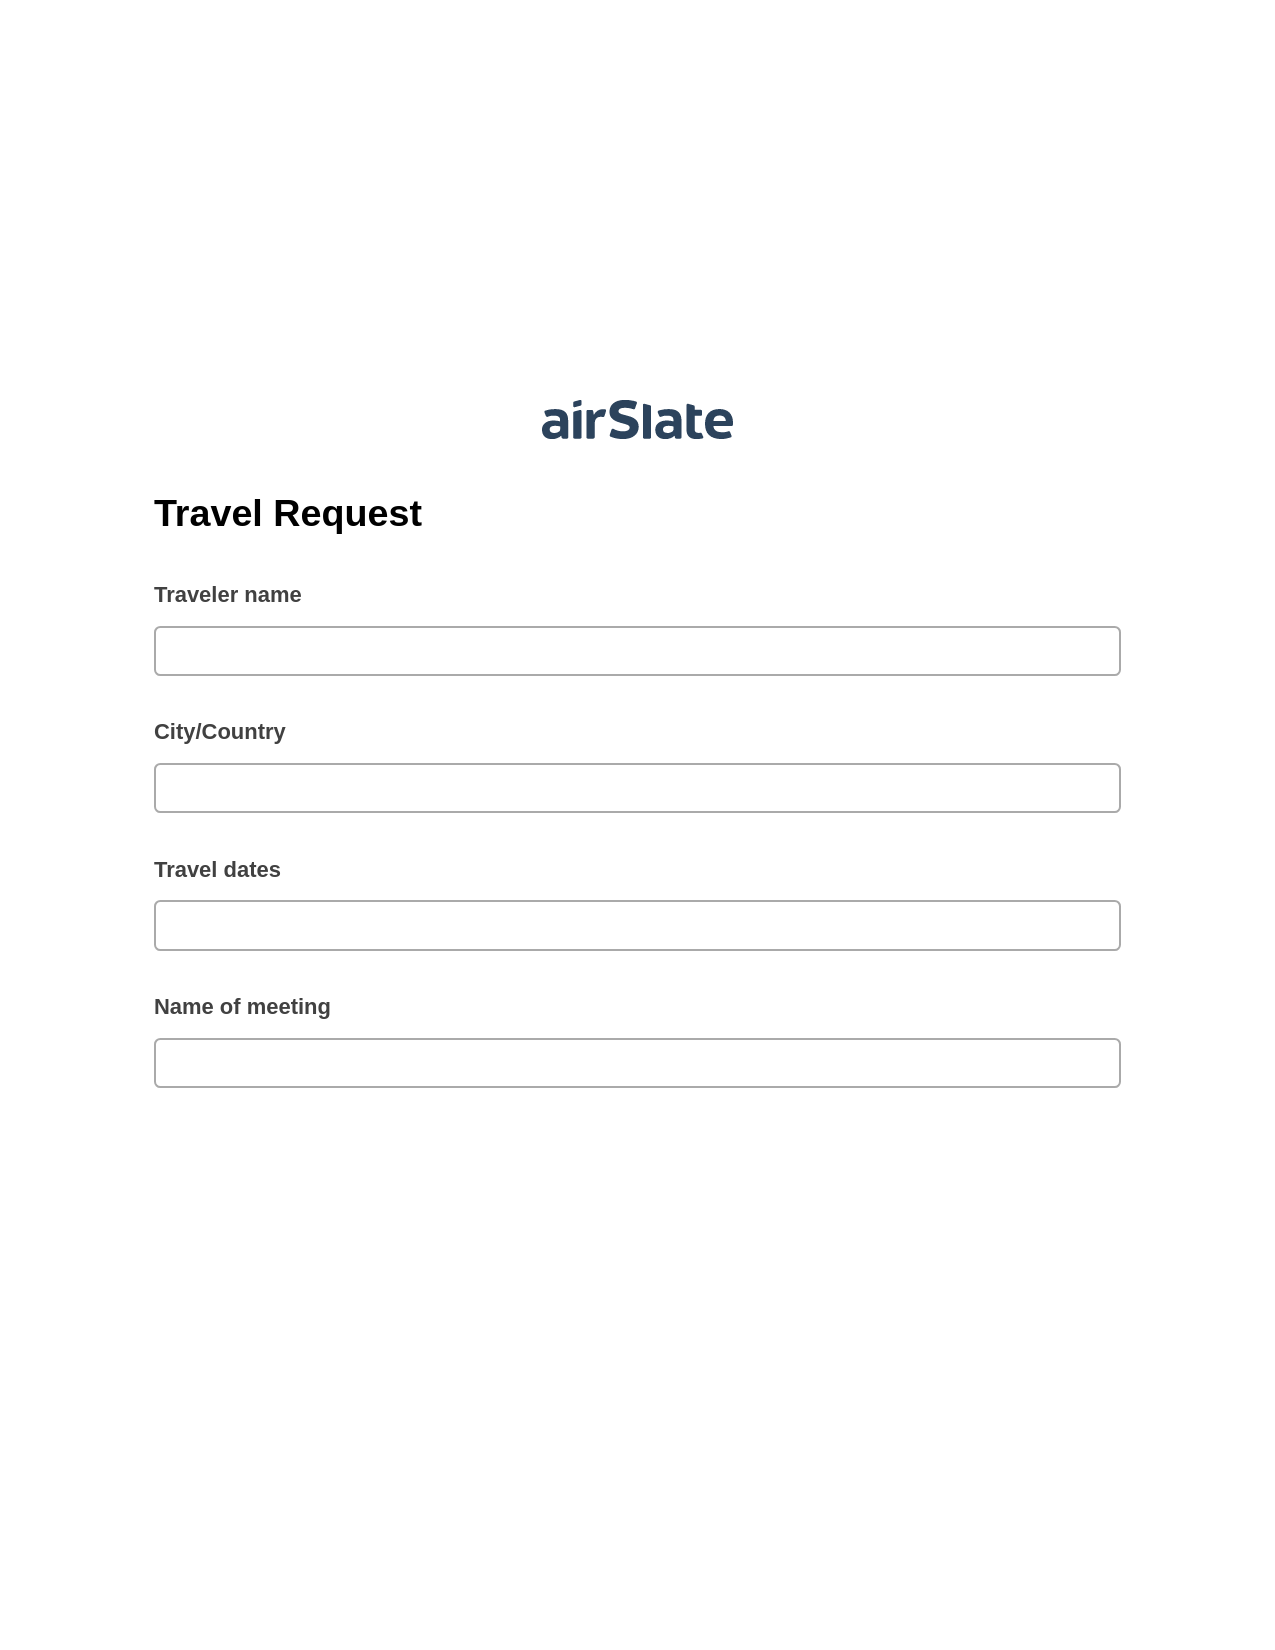 Multirole Travel Request Pre-fill Dropdown from Airtable, Create Slate Reminder Bot, Export to Formstack Documents Bot